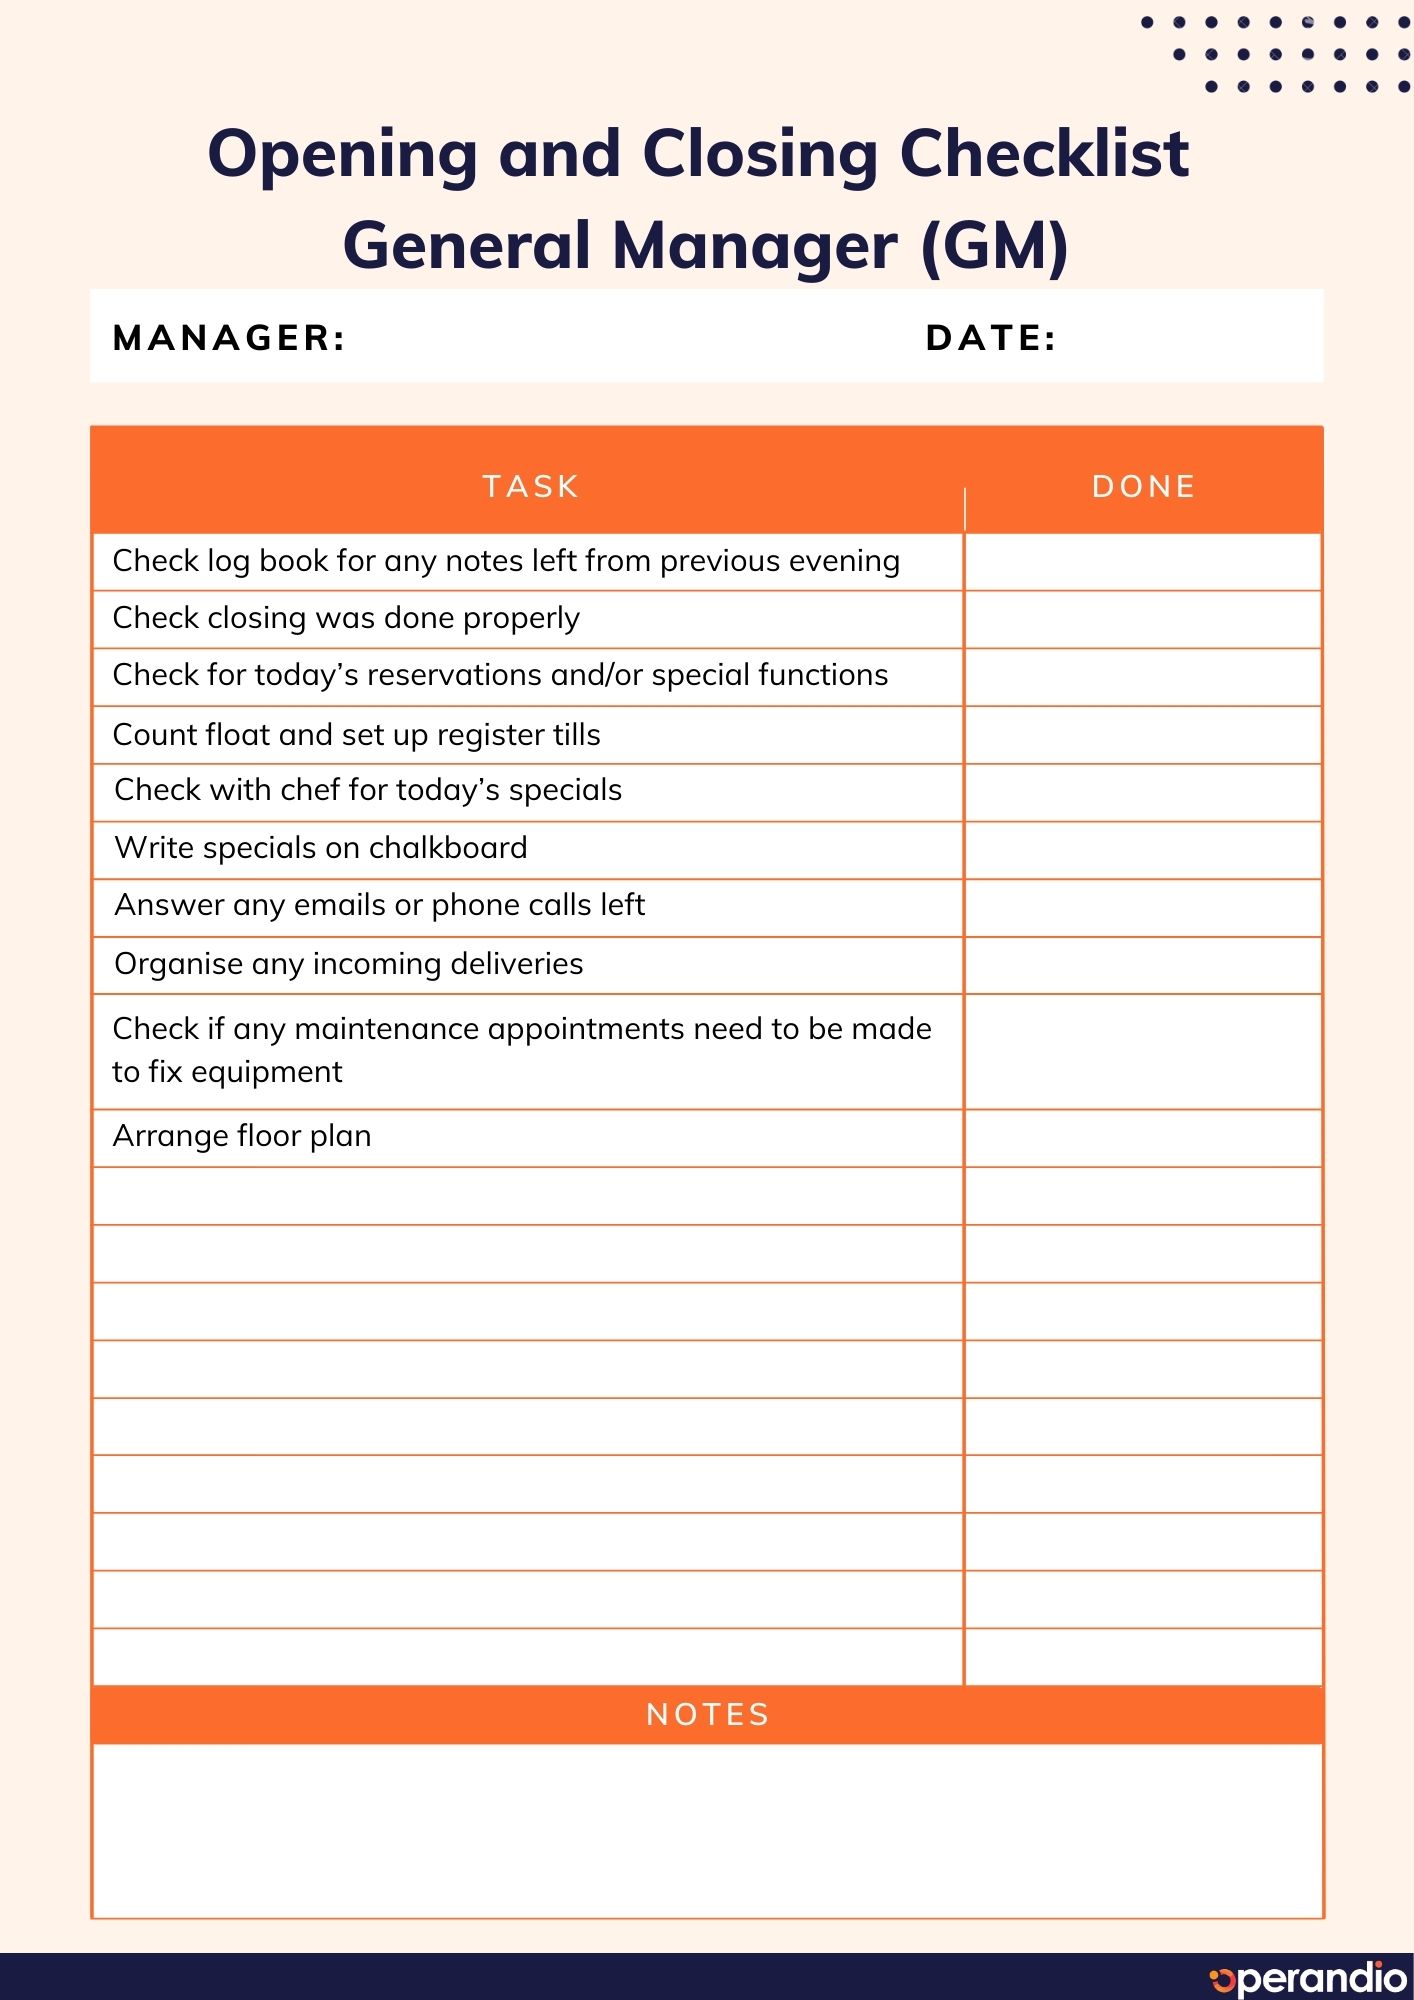 Opening and closing checklist template page2